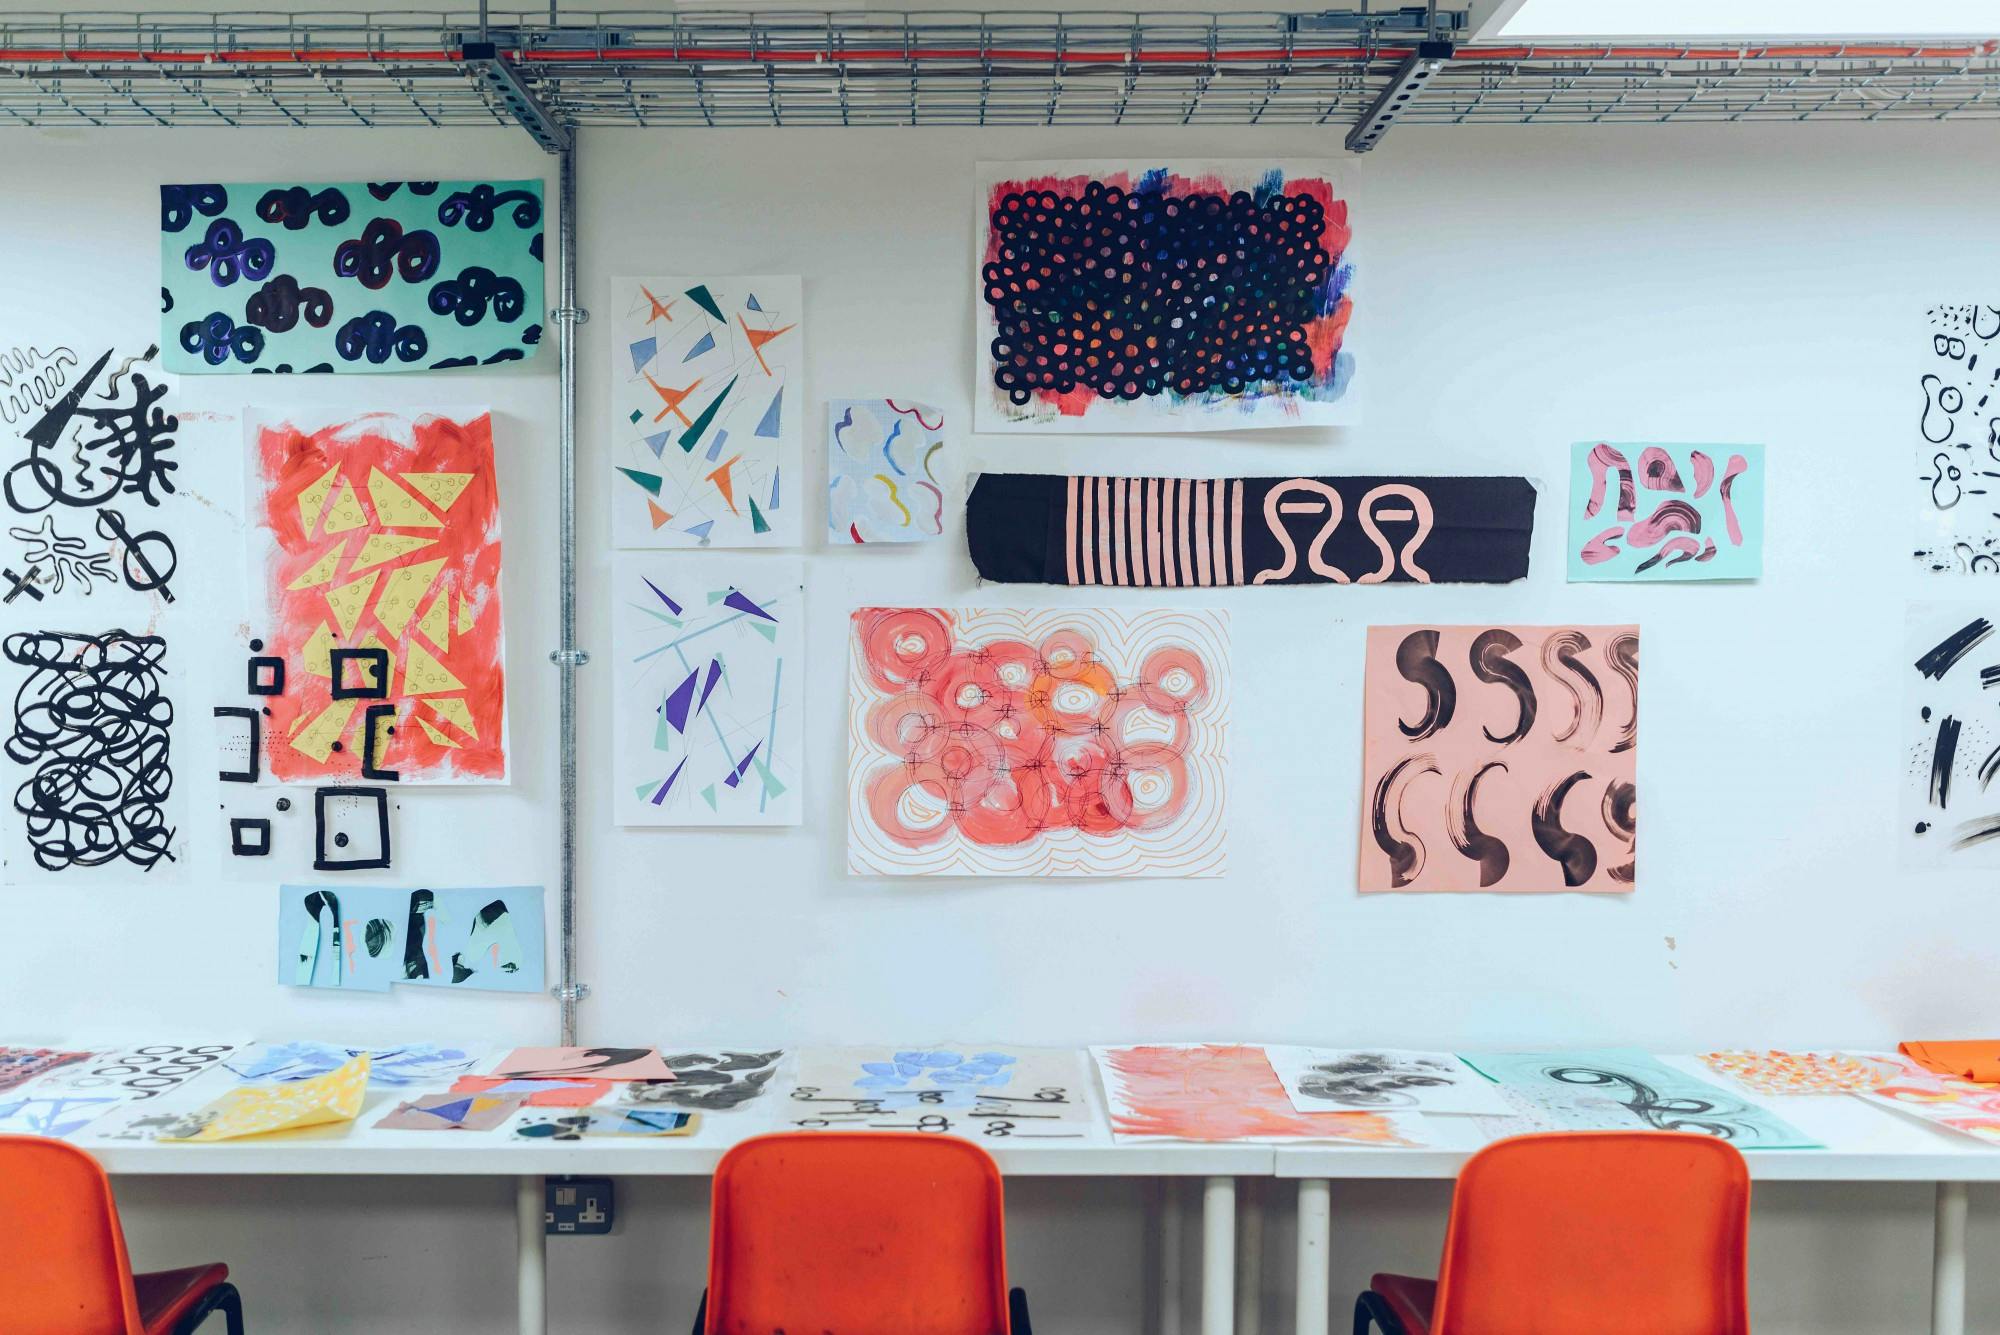 Early student work from Foundation Diploma in Art and Design students in the new Palace Studios